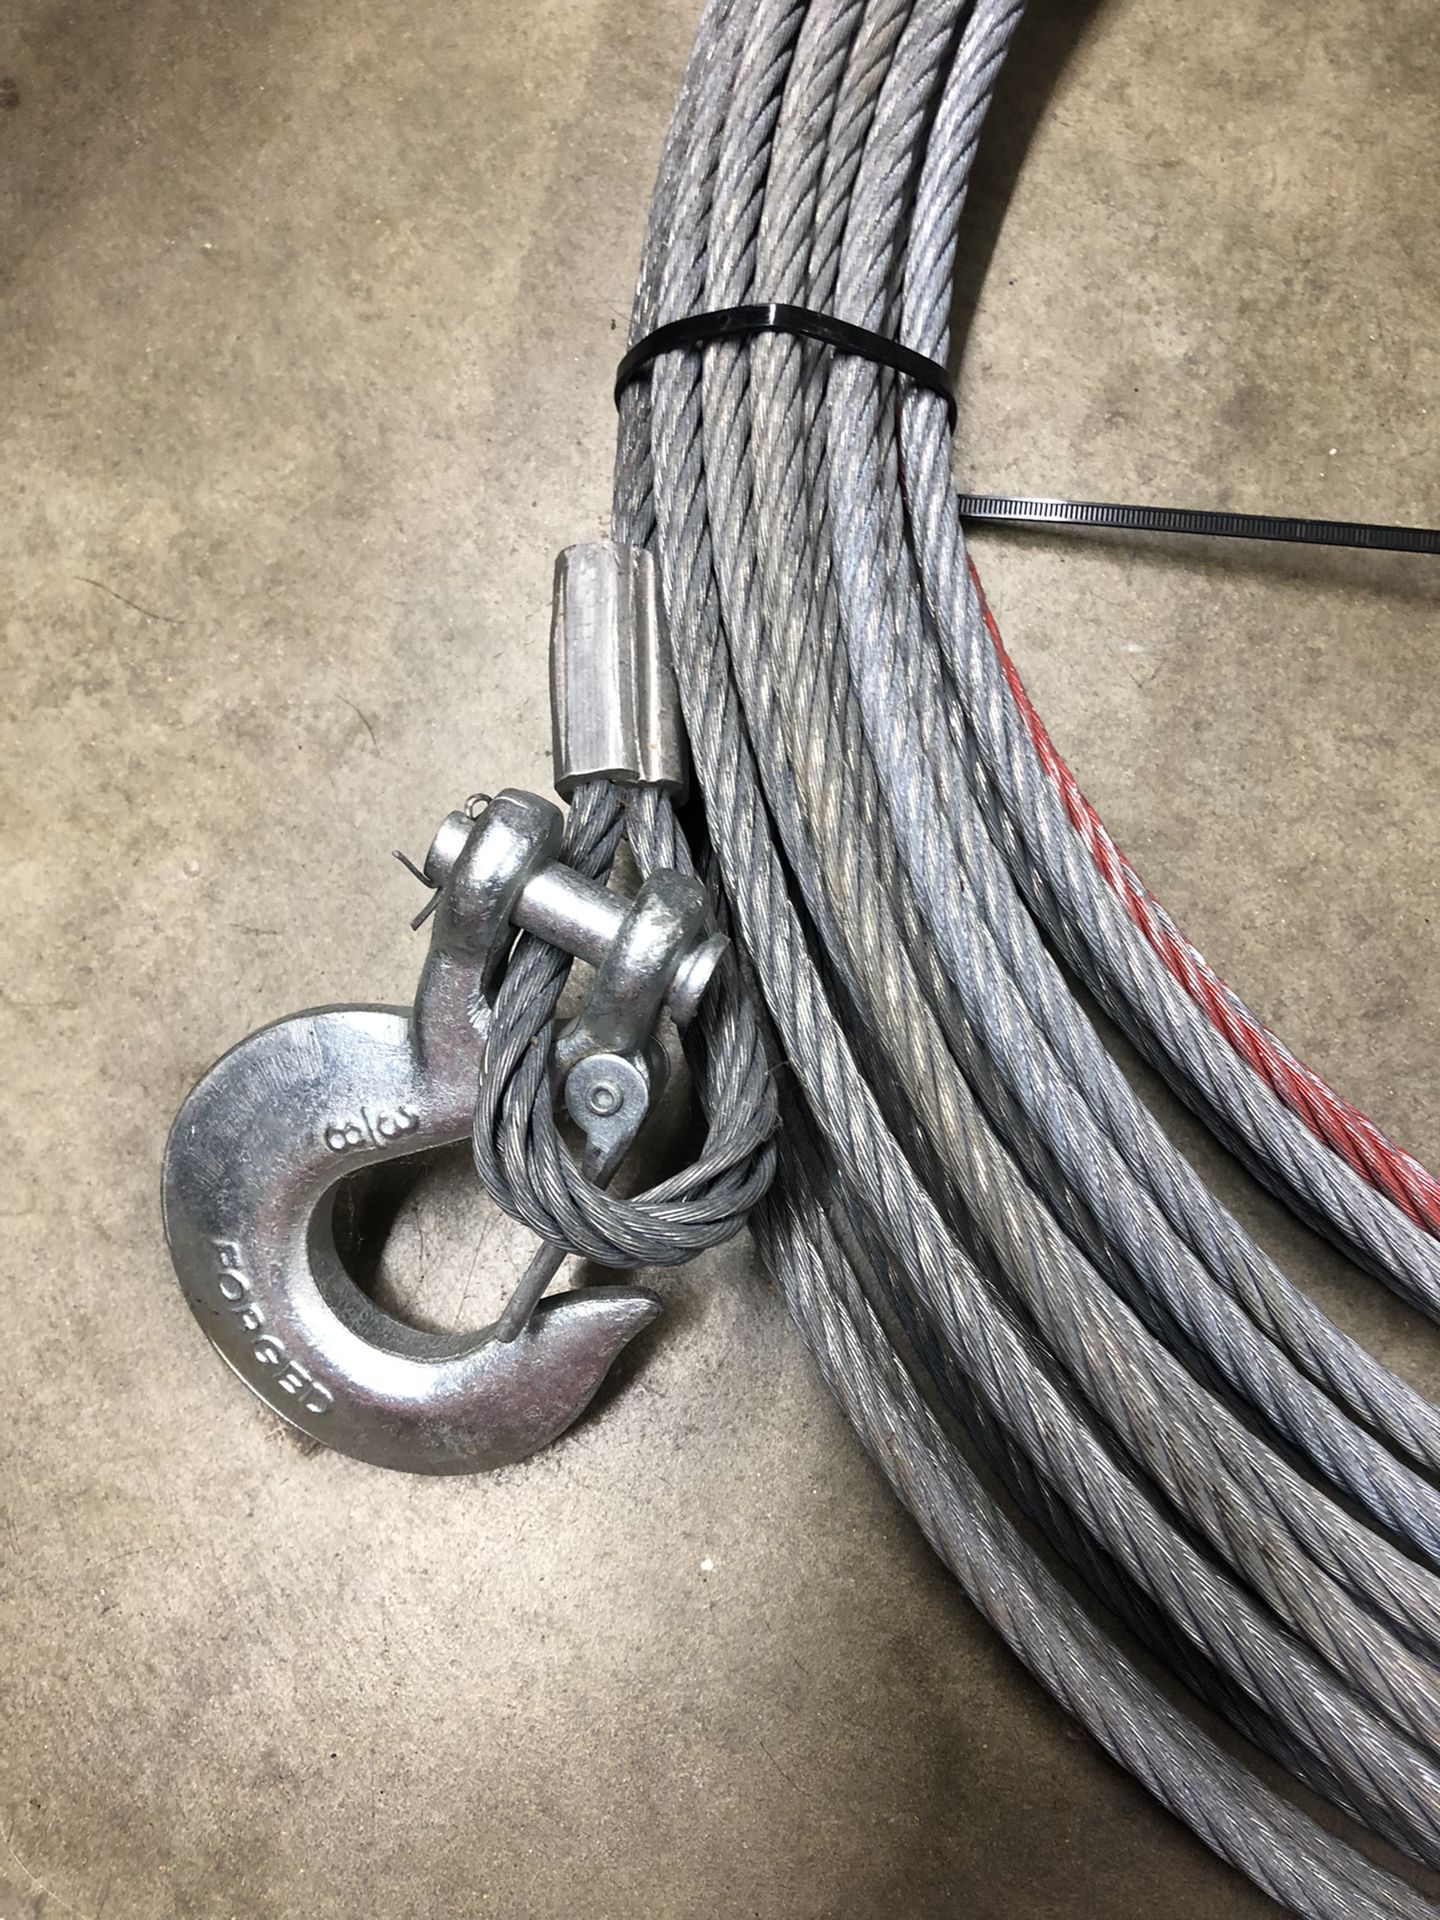 Steel cable for a winch or tow truck